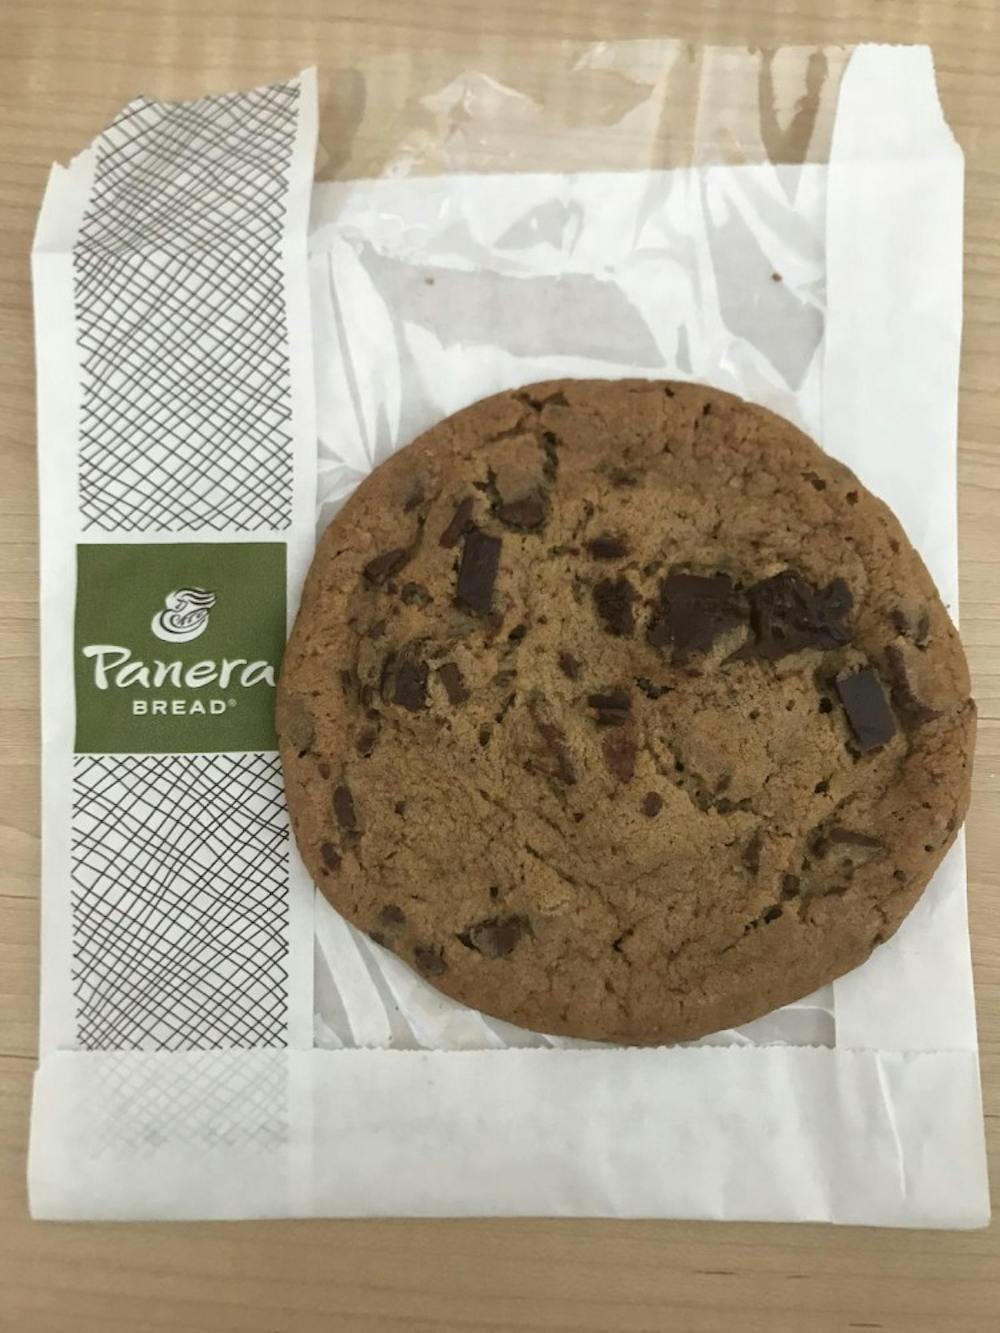 It is definitely worth purchasing the Panera cookie if you are a member and have the $0.99 bakery item upgrade on your order. 